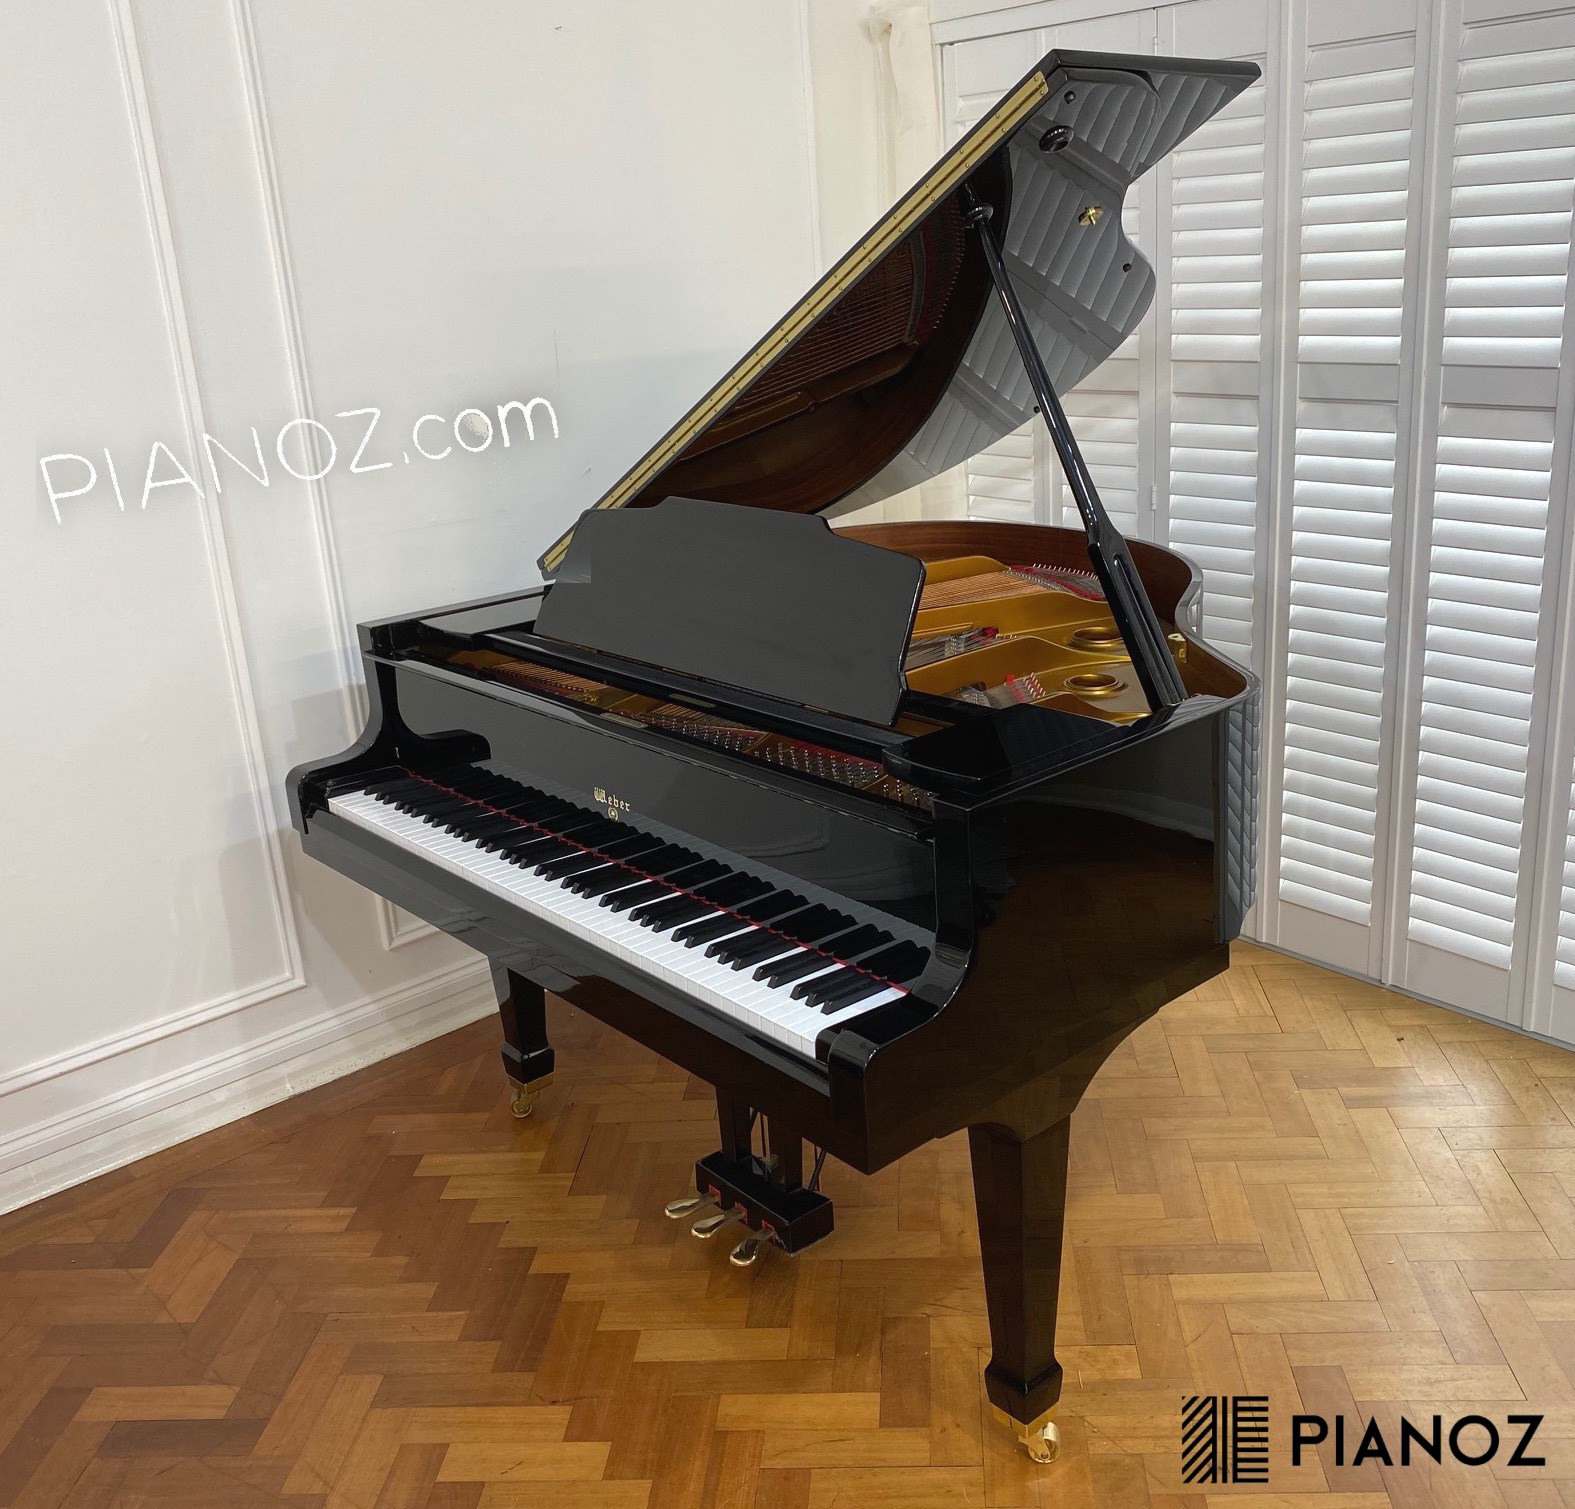 Weber 150 Baby Grand Piano piano for sale in UK